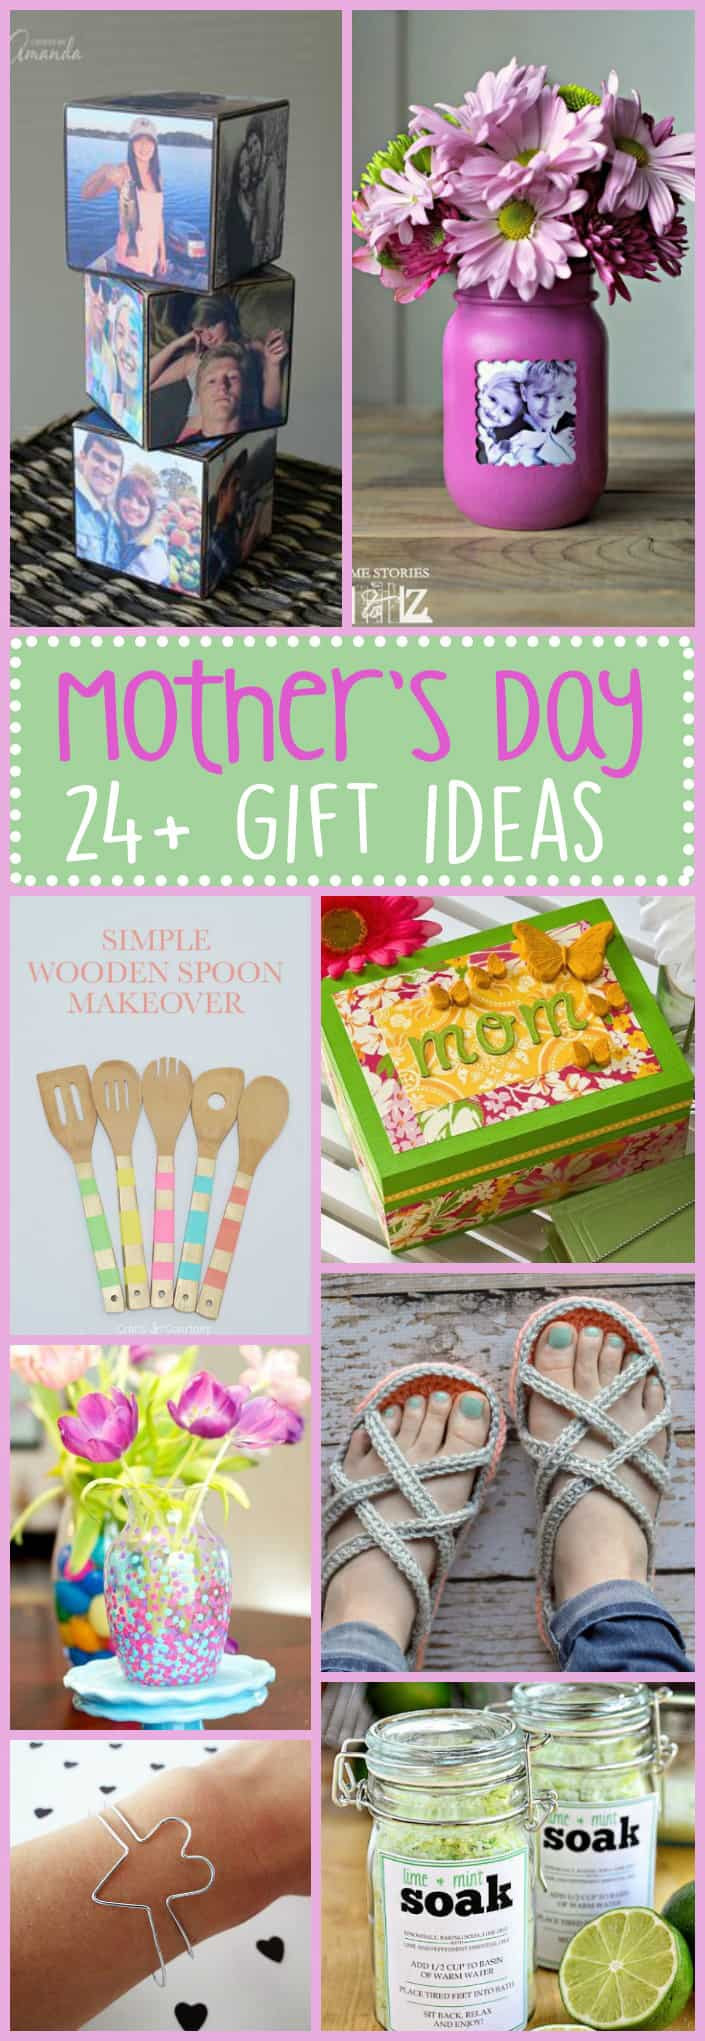 Unique Mother'S Day Gift Ideas
 Mother s Day Gift Ideas 24 t ideas for Mother s Day